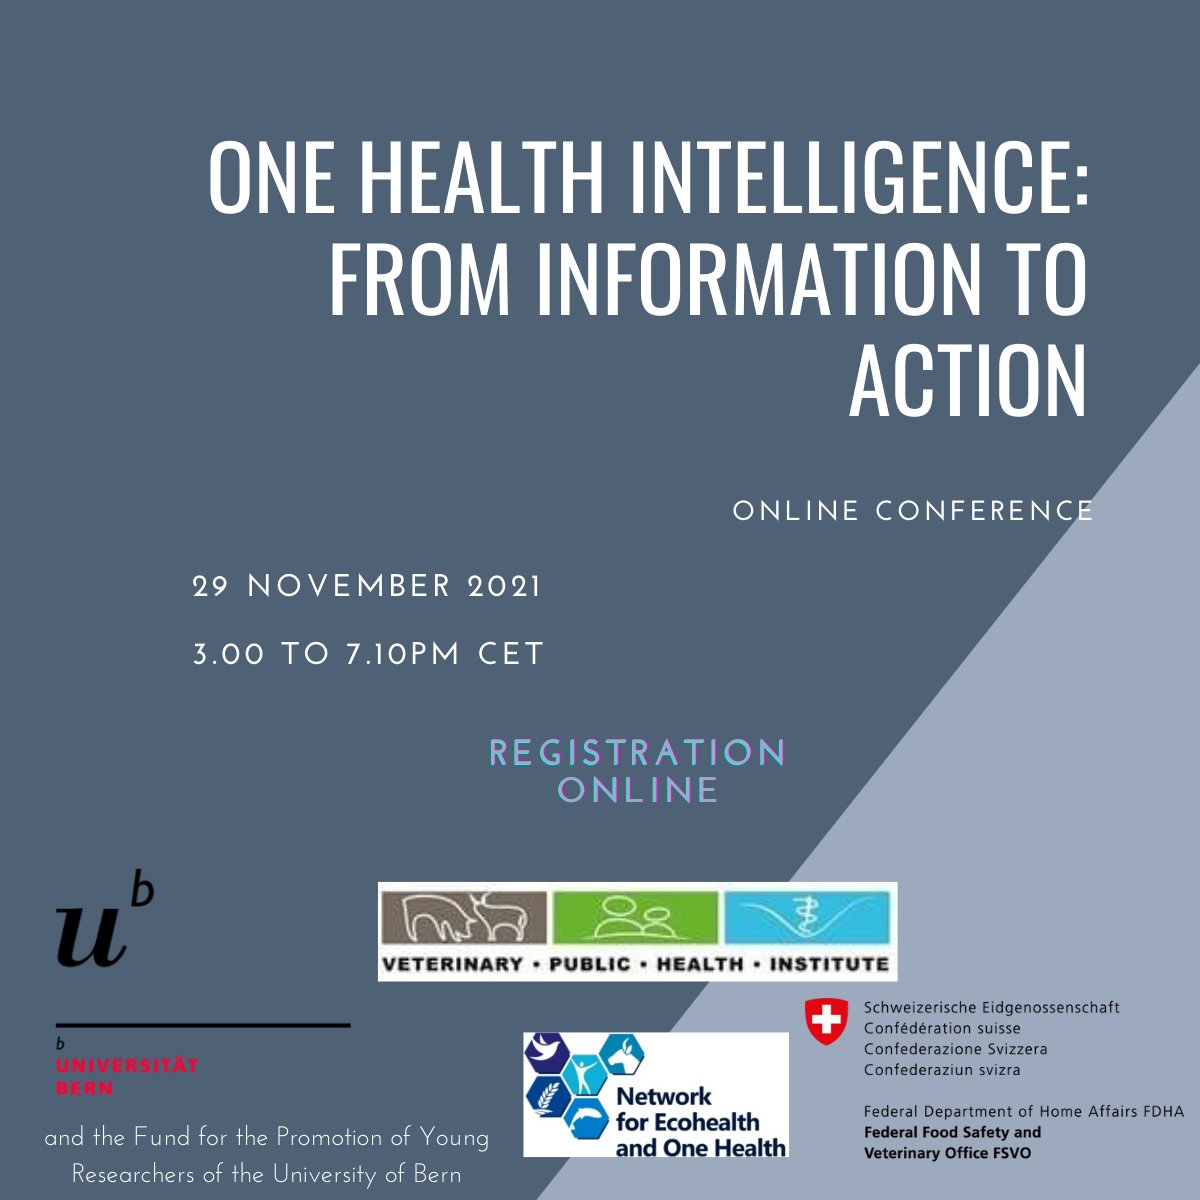 We are organising a #OneHealth conference on 29 November 2021.
Don't hesitate to join and register online! Book the date!
#youngresearchers #research @unibern  

Programme to come.